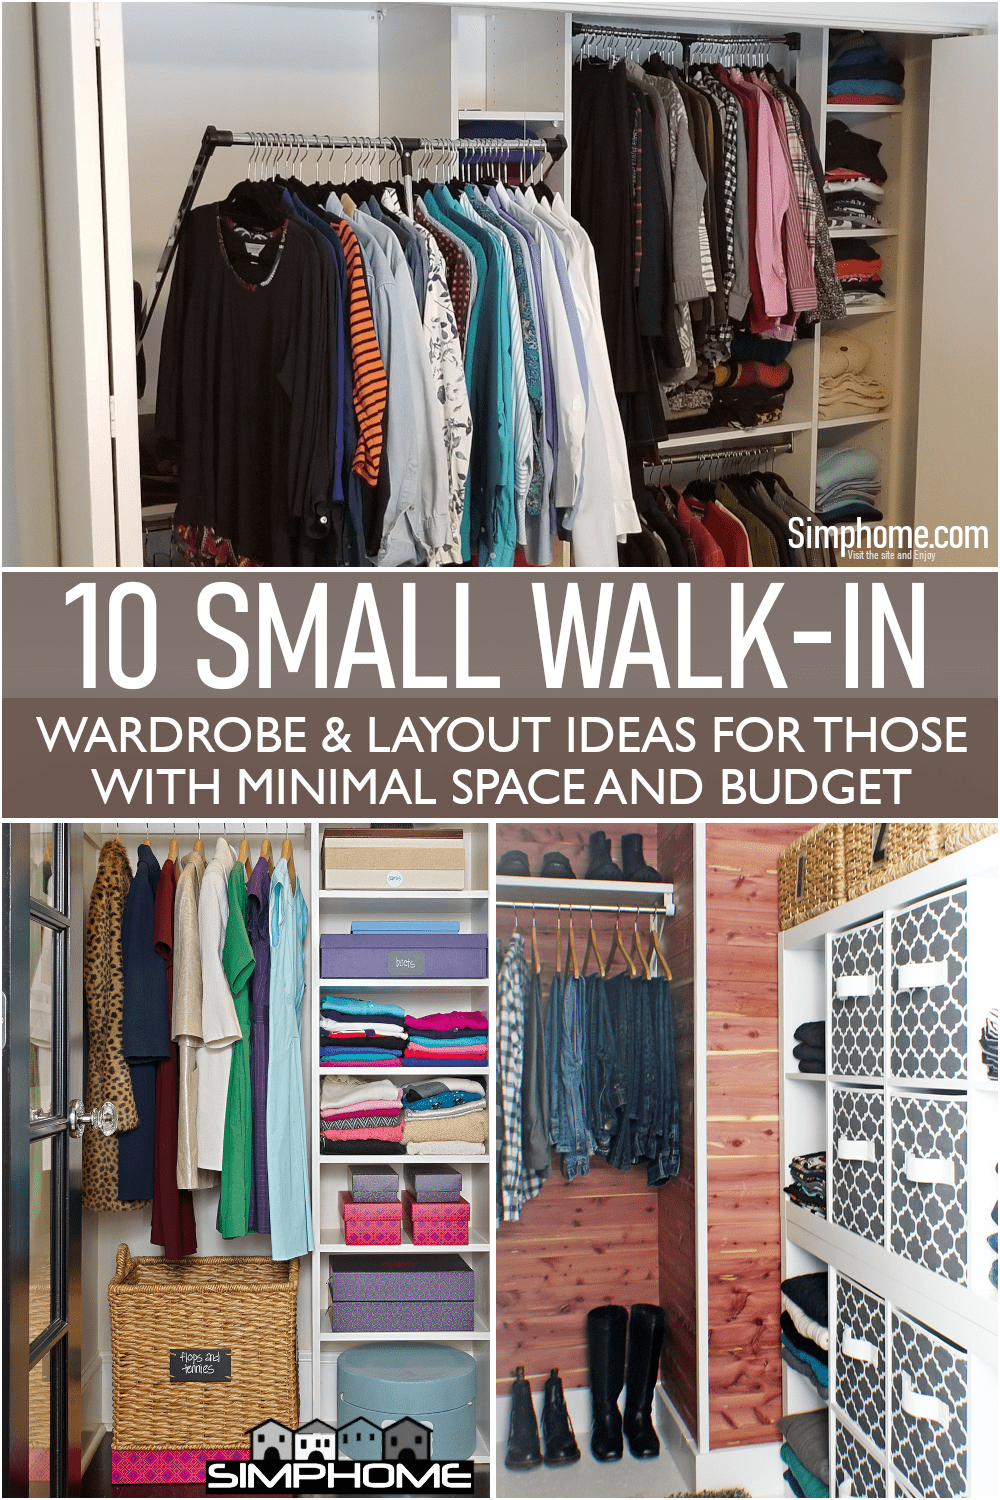 Take inspiration from 10 Small Walk-In Wardrobe Layouts 